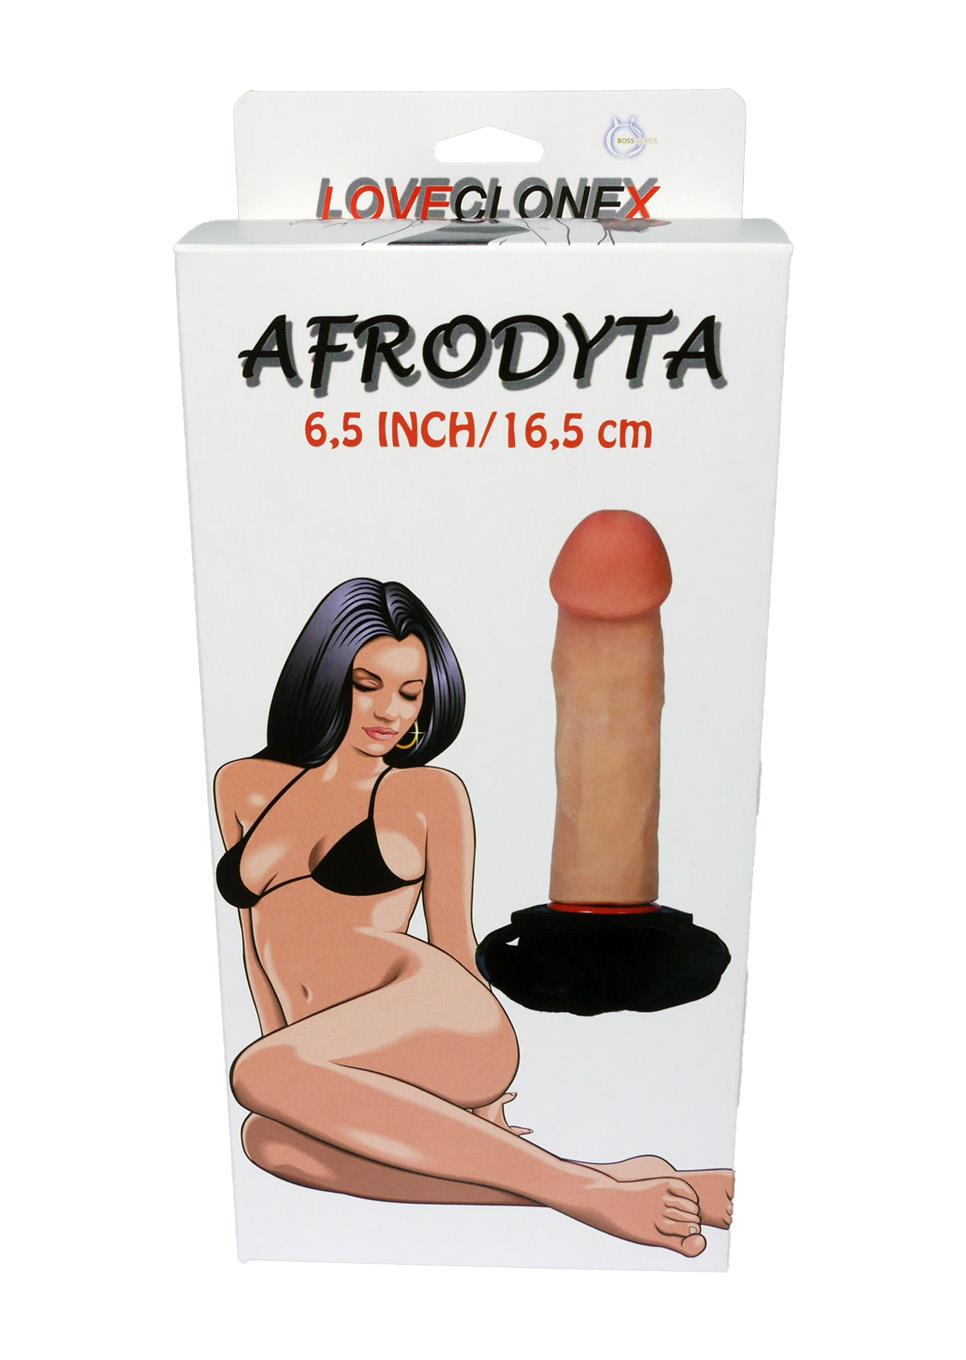 Bossoftoys AFRODYTA Strap On 6,5 inch / 16,5cm - Loveclonex - Ultra Realistic Strap on  - 21-00012 - Cyber skin feels like real - Better then Silicone - 3,5 cm thick - Flesh